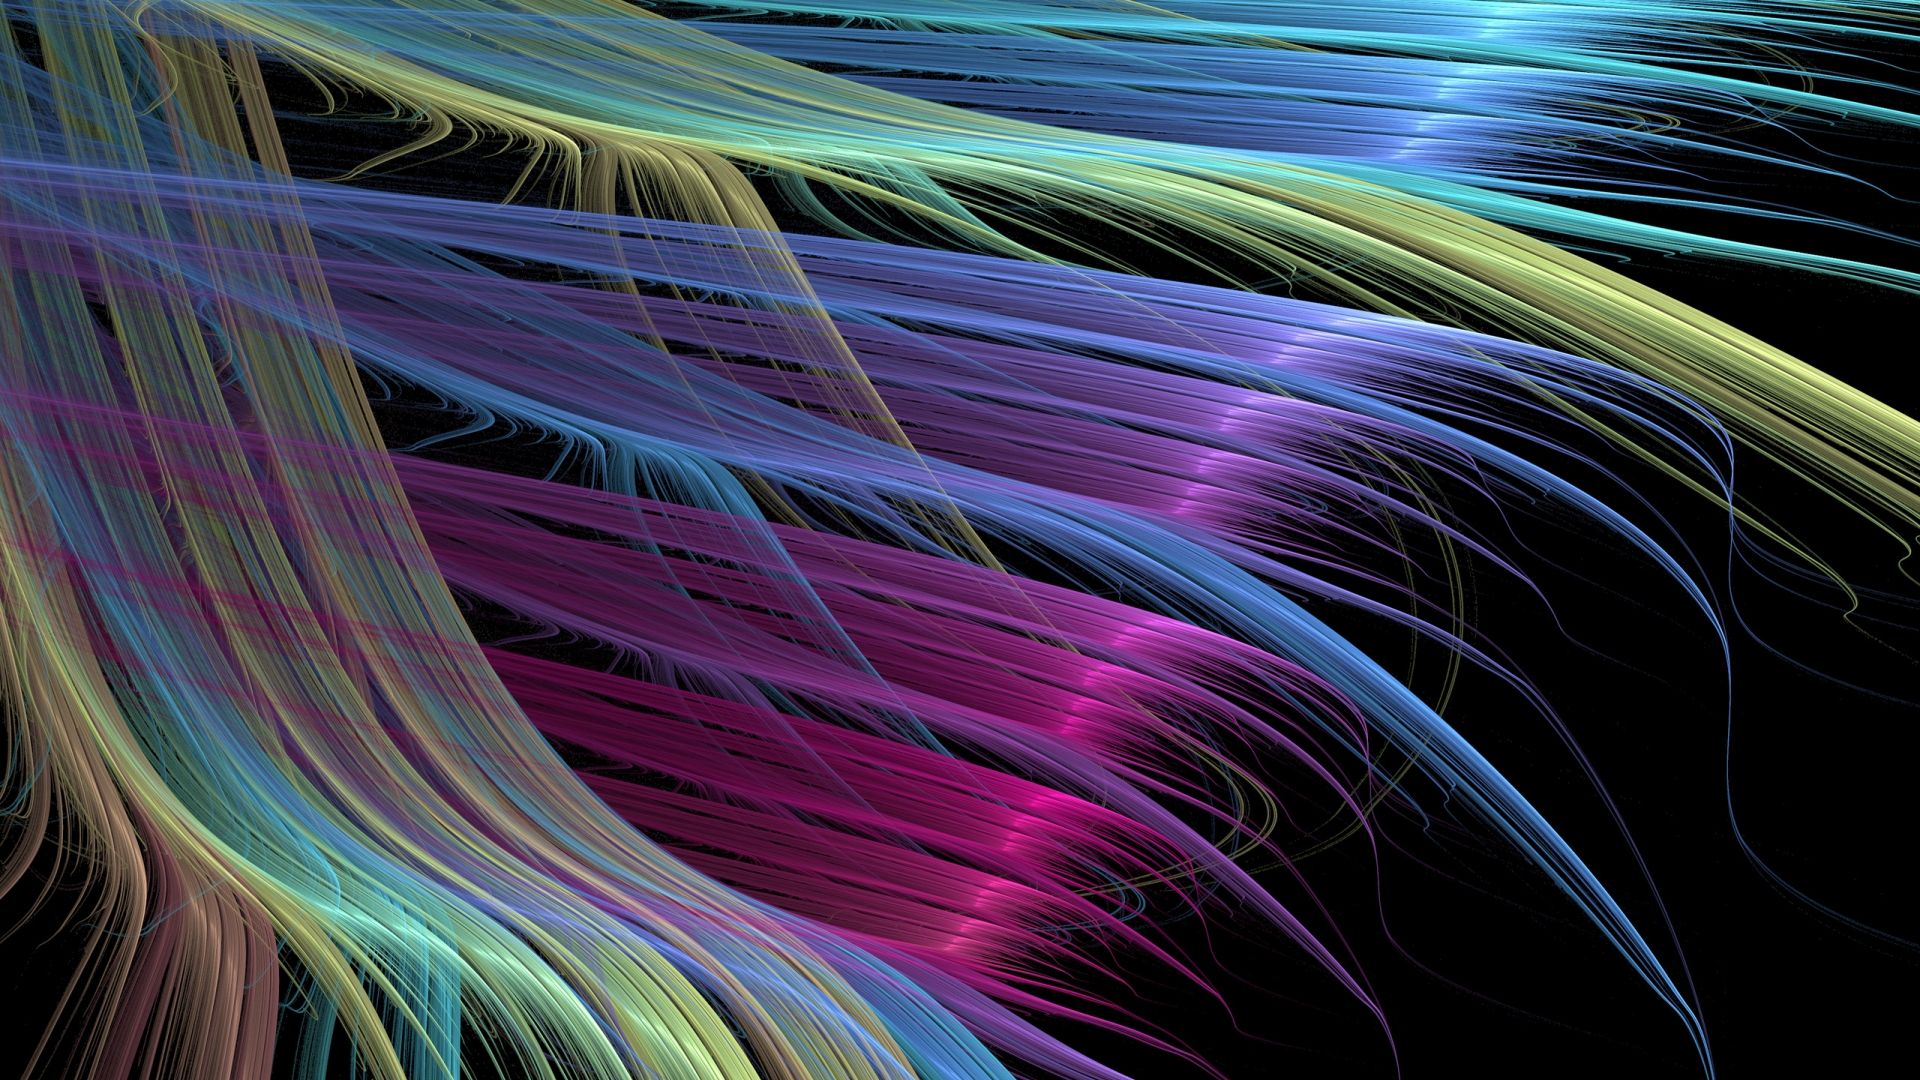 3d 0262 Wallpaper - Multi Colored Feather Backgrounds - HD Wallpaper 